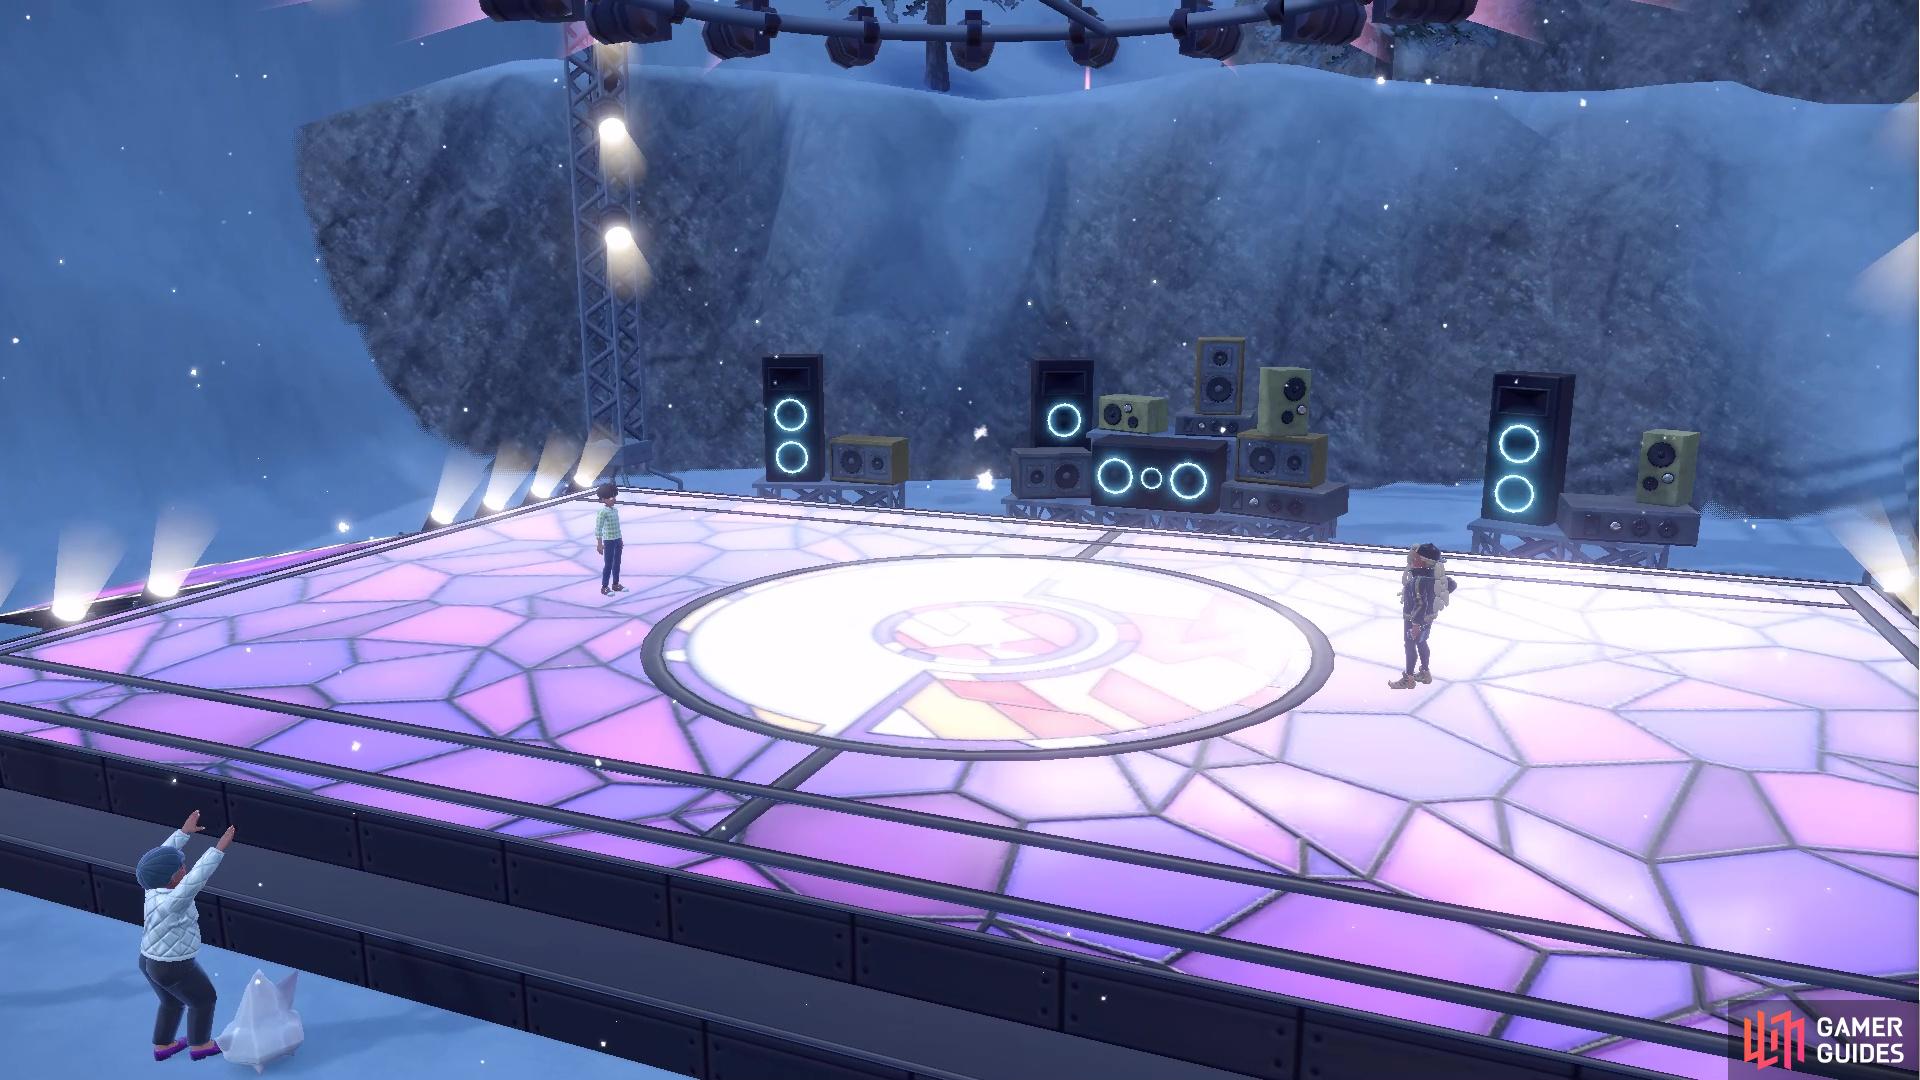 Rime has a big fancy stage all set up ready for your battle!